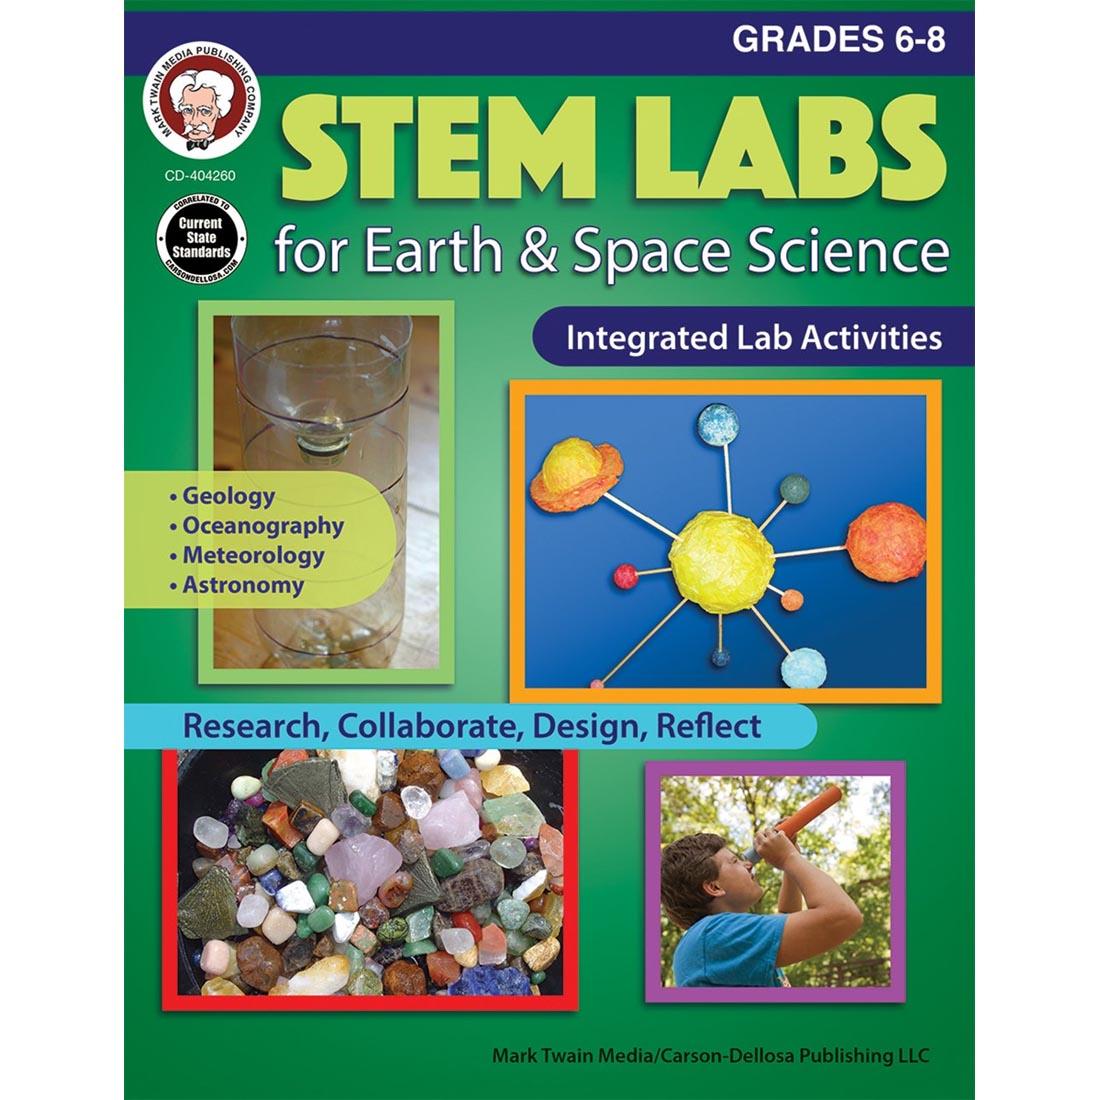 STEM Labs for Earth & Space Science by Carson Dellosa